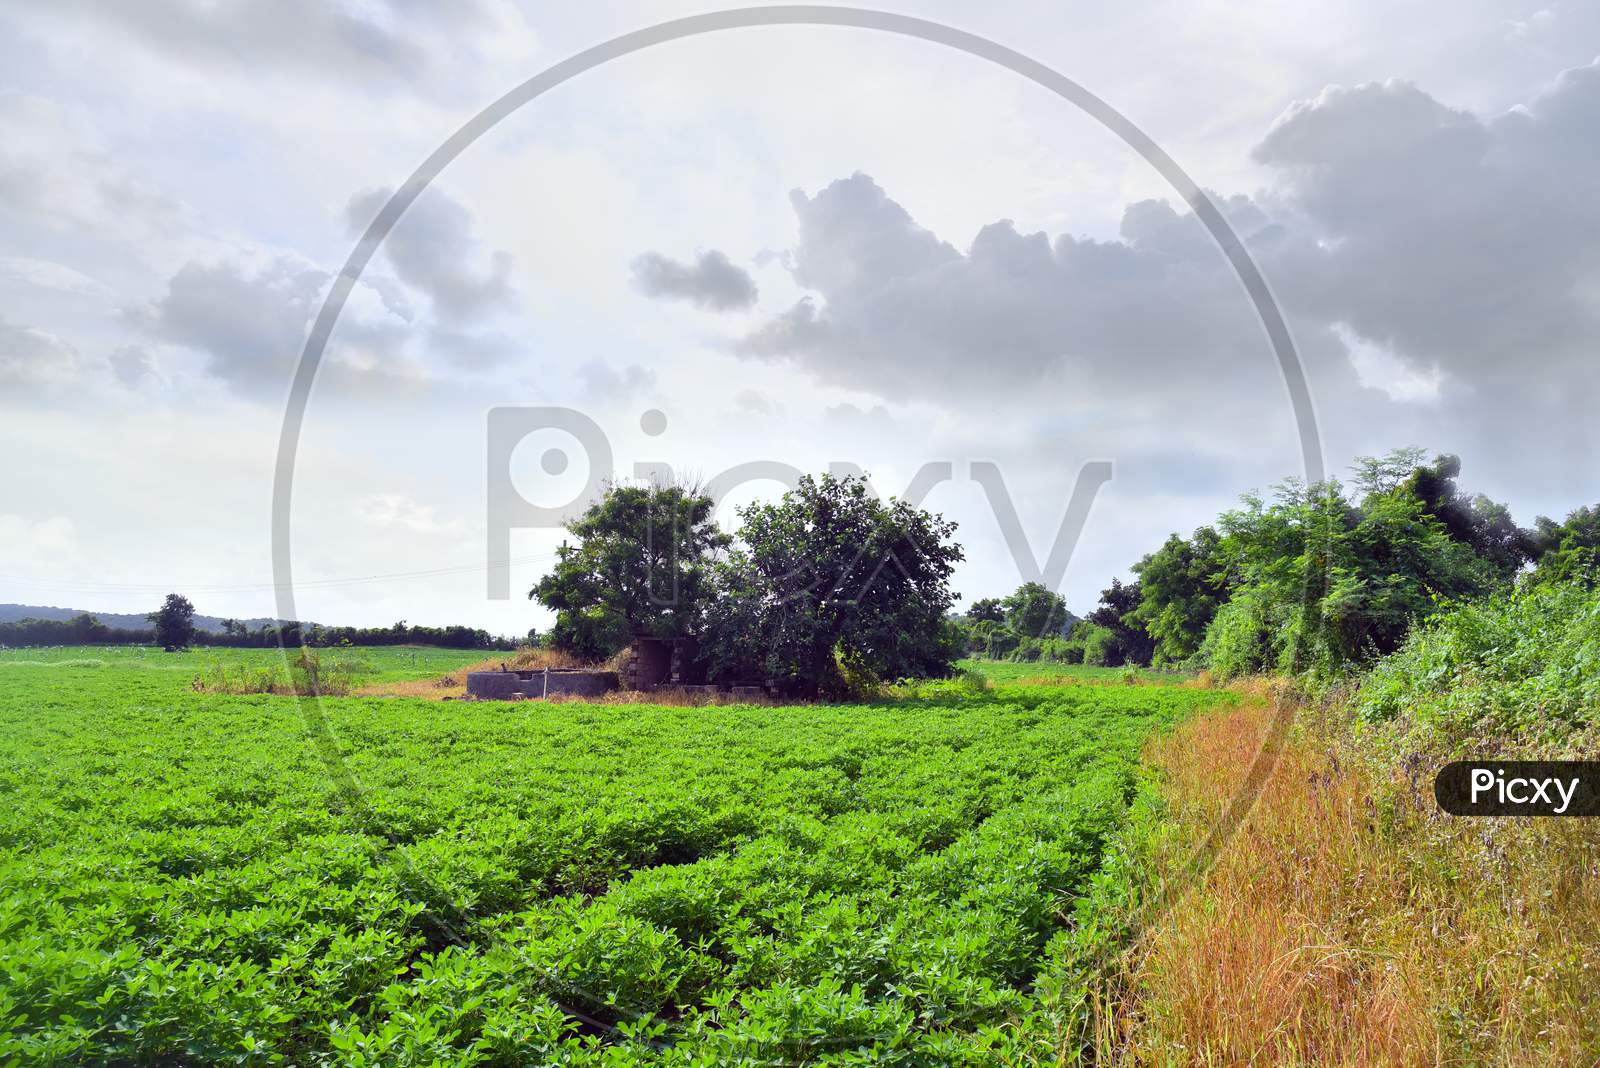 Agriculture, Peanut Field And Grass Stock Image .